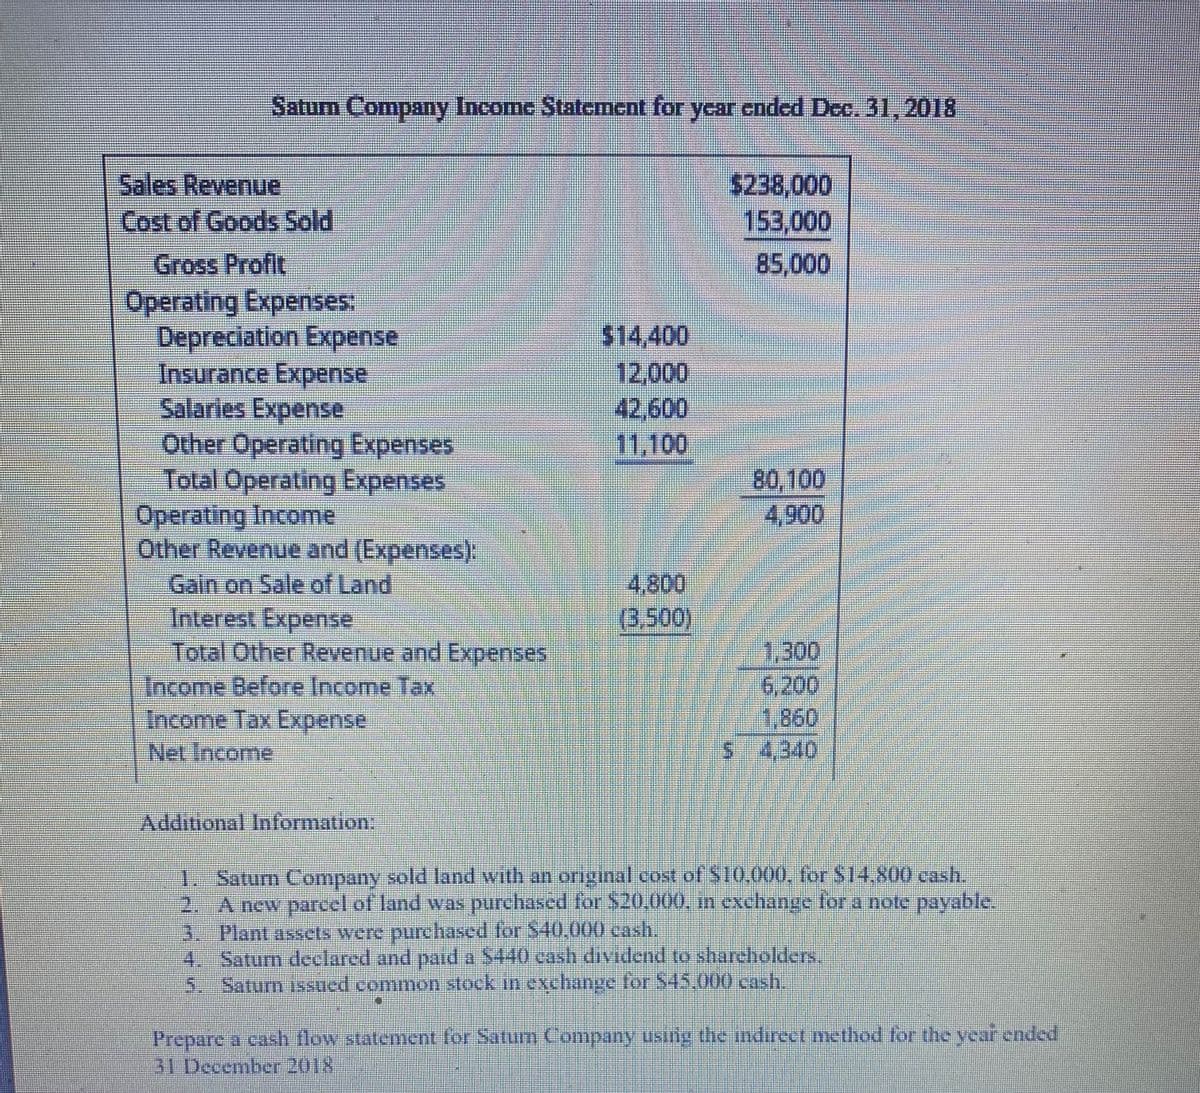 Satum Company Income Statement for year ended Dec. 31, 2018
Sales Revenue
Cost of Goods Sold
$238,000
153,000
85,000
Gross Profit
Operating Expenses:
Depreciation Expense
Insurance Expense
Salaries Expense
Other Operating Expenses
Total Operating Expenses
Operating Income
Other Revenue and (Expenses):
Gain on Sale of Land
Interest Expense
Total Other Revenue and Expenses
Income Before Income Tax
Income Tax Expense
Net Income
$14,400
12,000
42,600
11,100
80,100
4,900
4,800
(3,500)
1,300
6,200
1,860
5 4,340
Additional Information:
1. Saturn Company sold land with an original cost of S10,000, for S14.800 cash.
2. A new parcel of land was purchased for $20,000, in exchange for a note payable.
3. Plant assets were purchased for $40,000 cash,
4. Satum declared.and paid a $440 cash dividend to shareholders.
5.
Saturn issued common stock in exchange for $45.000 cash.
Prepare a cash flow statement for Saturn Company usinig the indireet method for the year ended
31 December 2018
